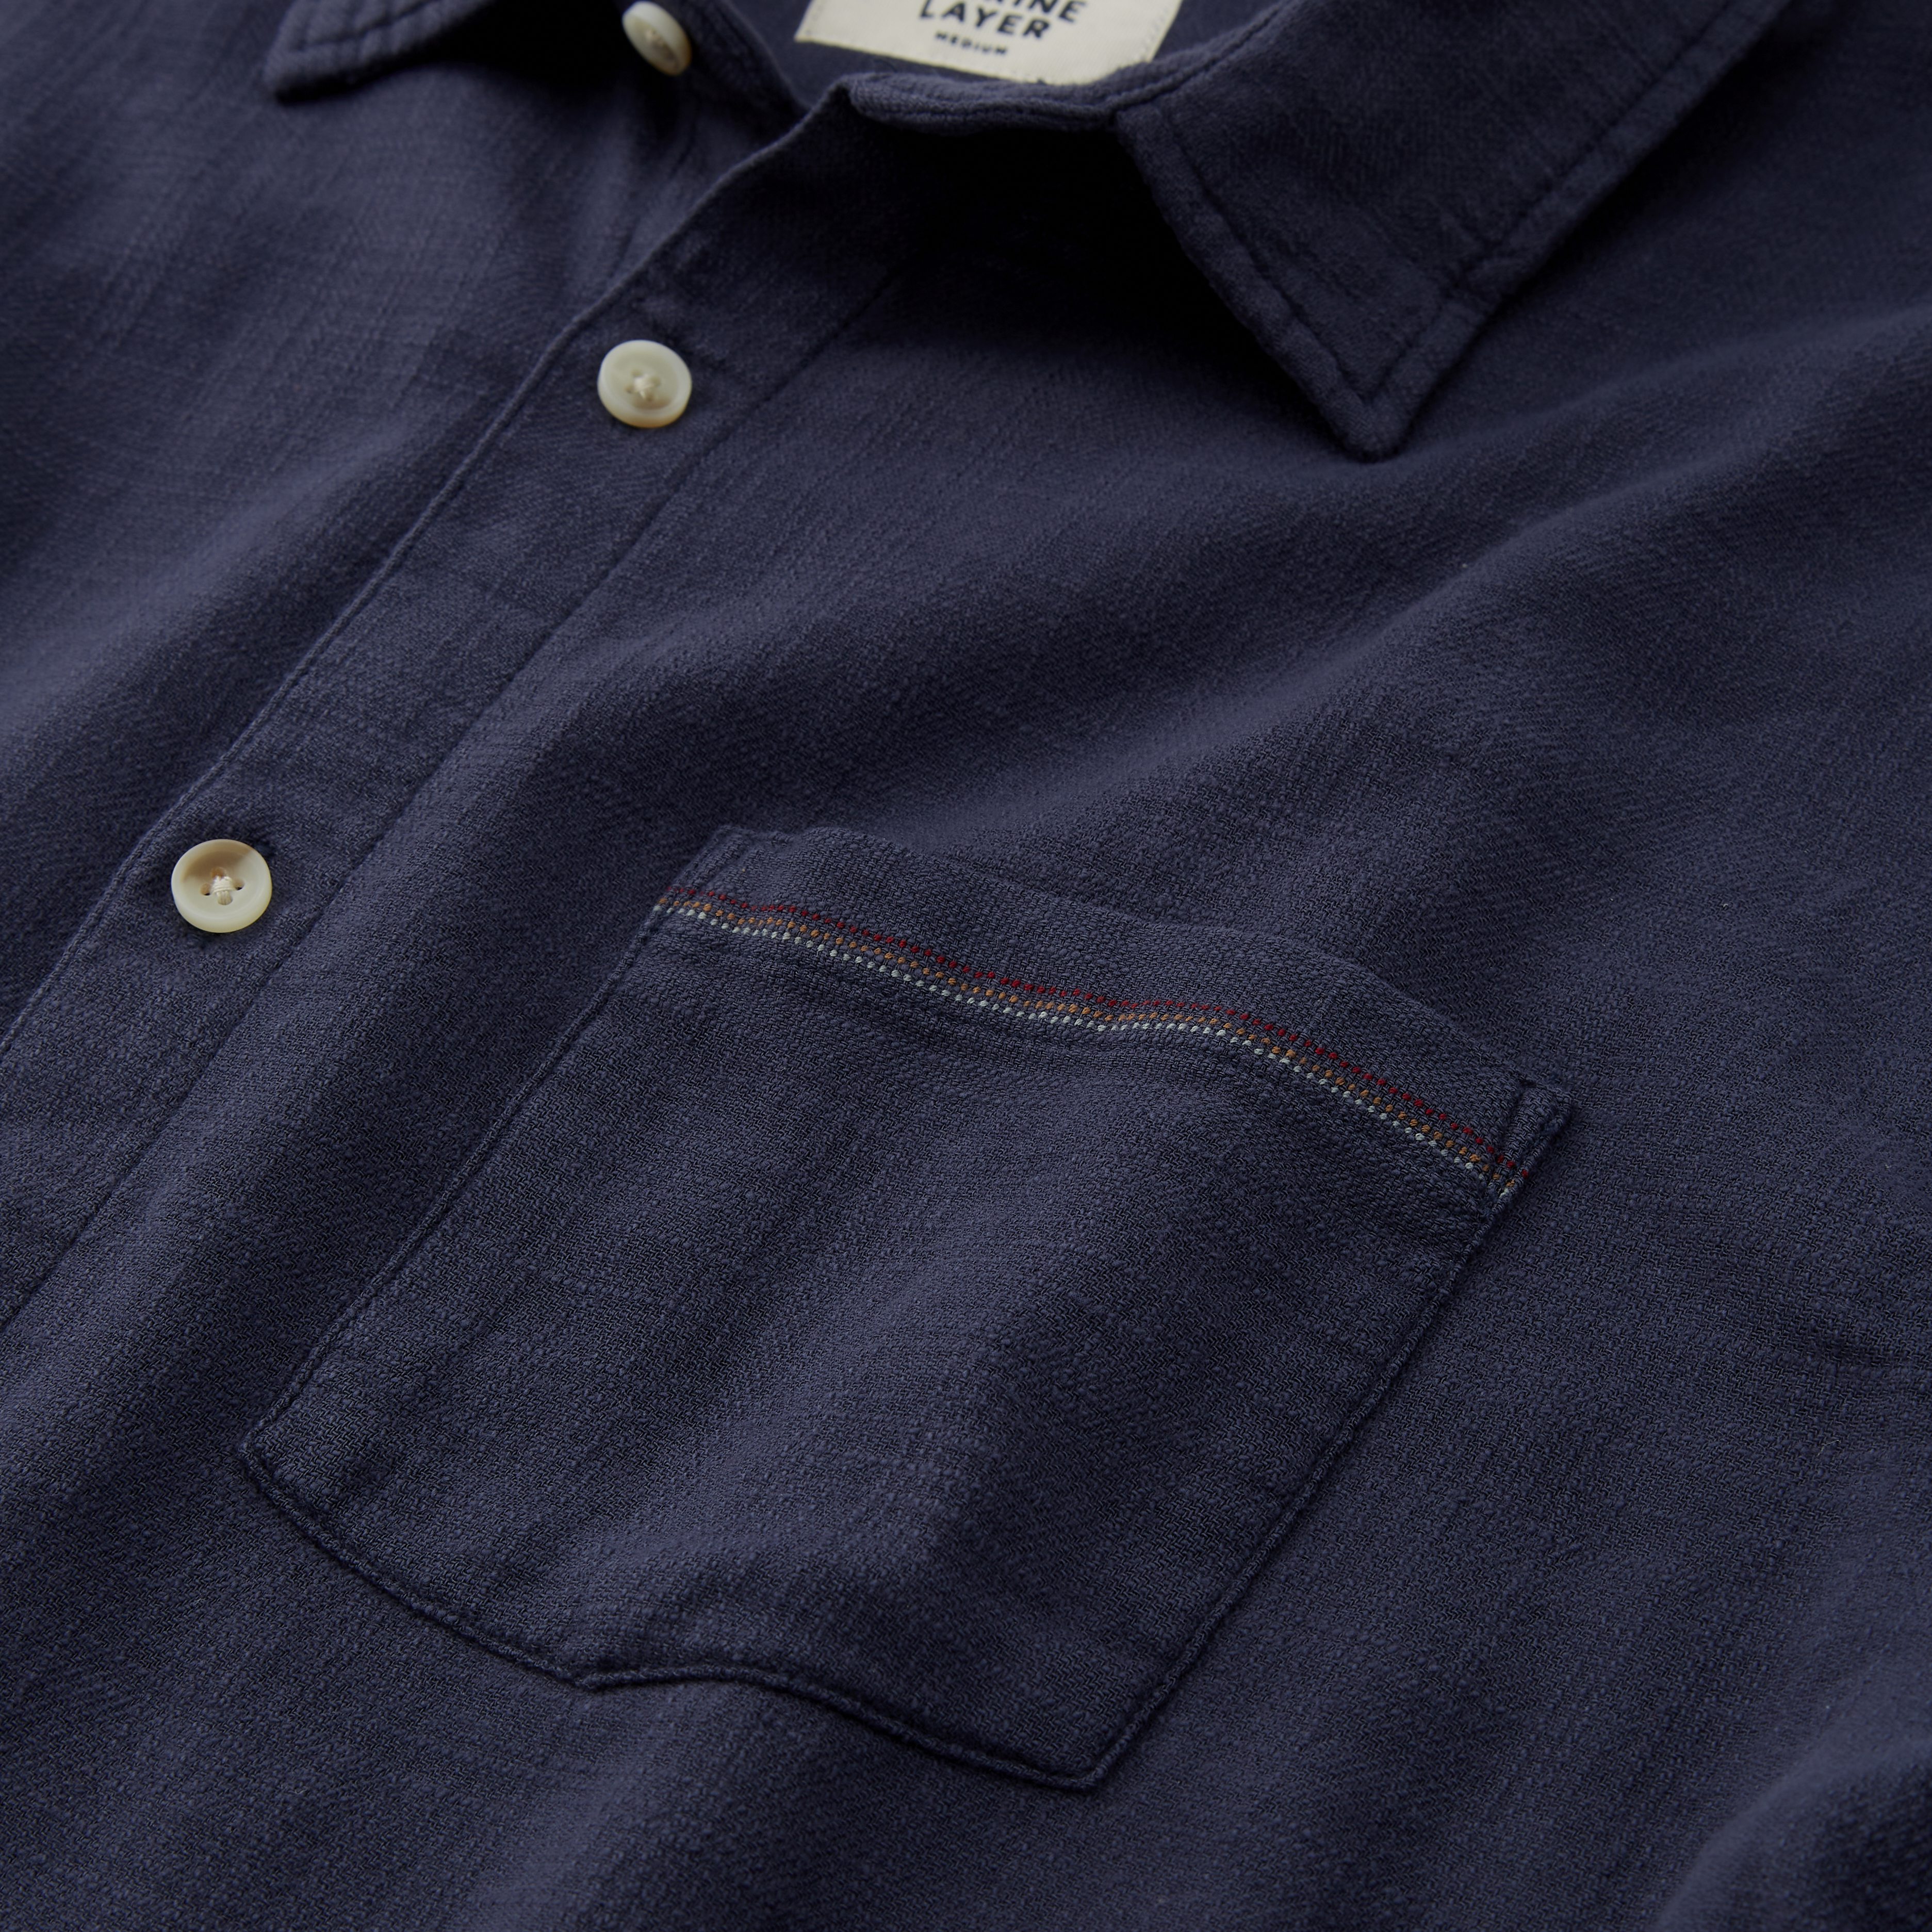 Marine Layer Classic Stretch Selvage Long Sleeve Shirt - Mood